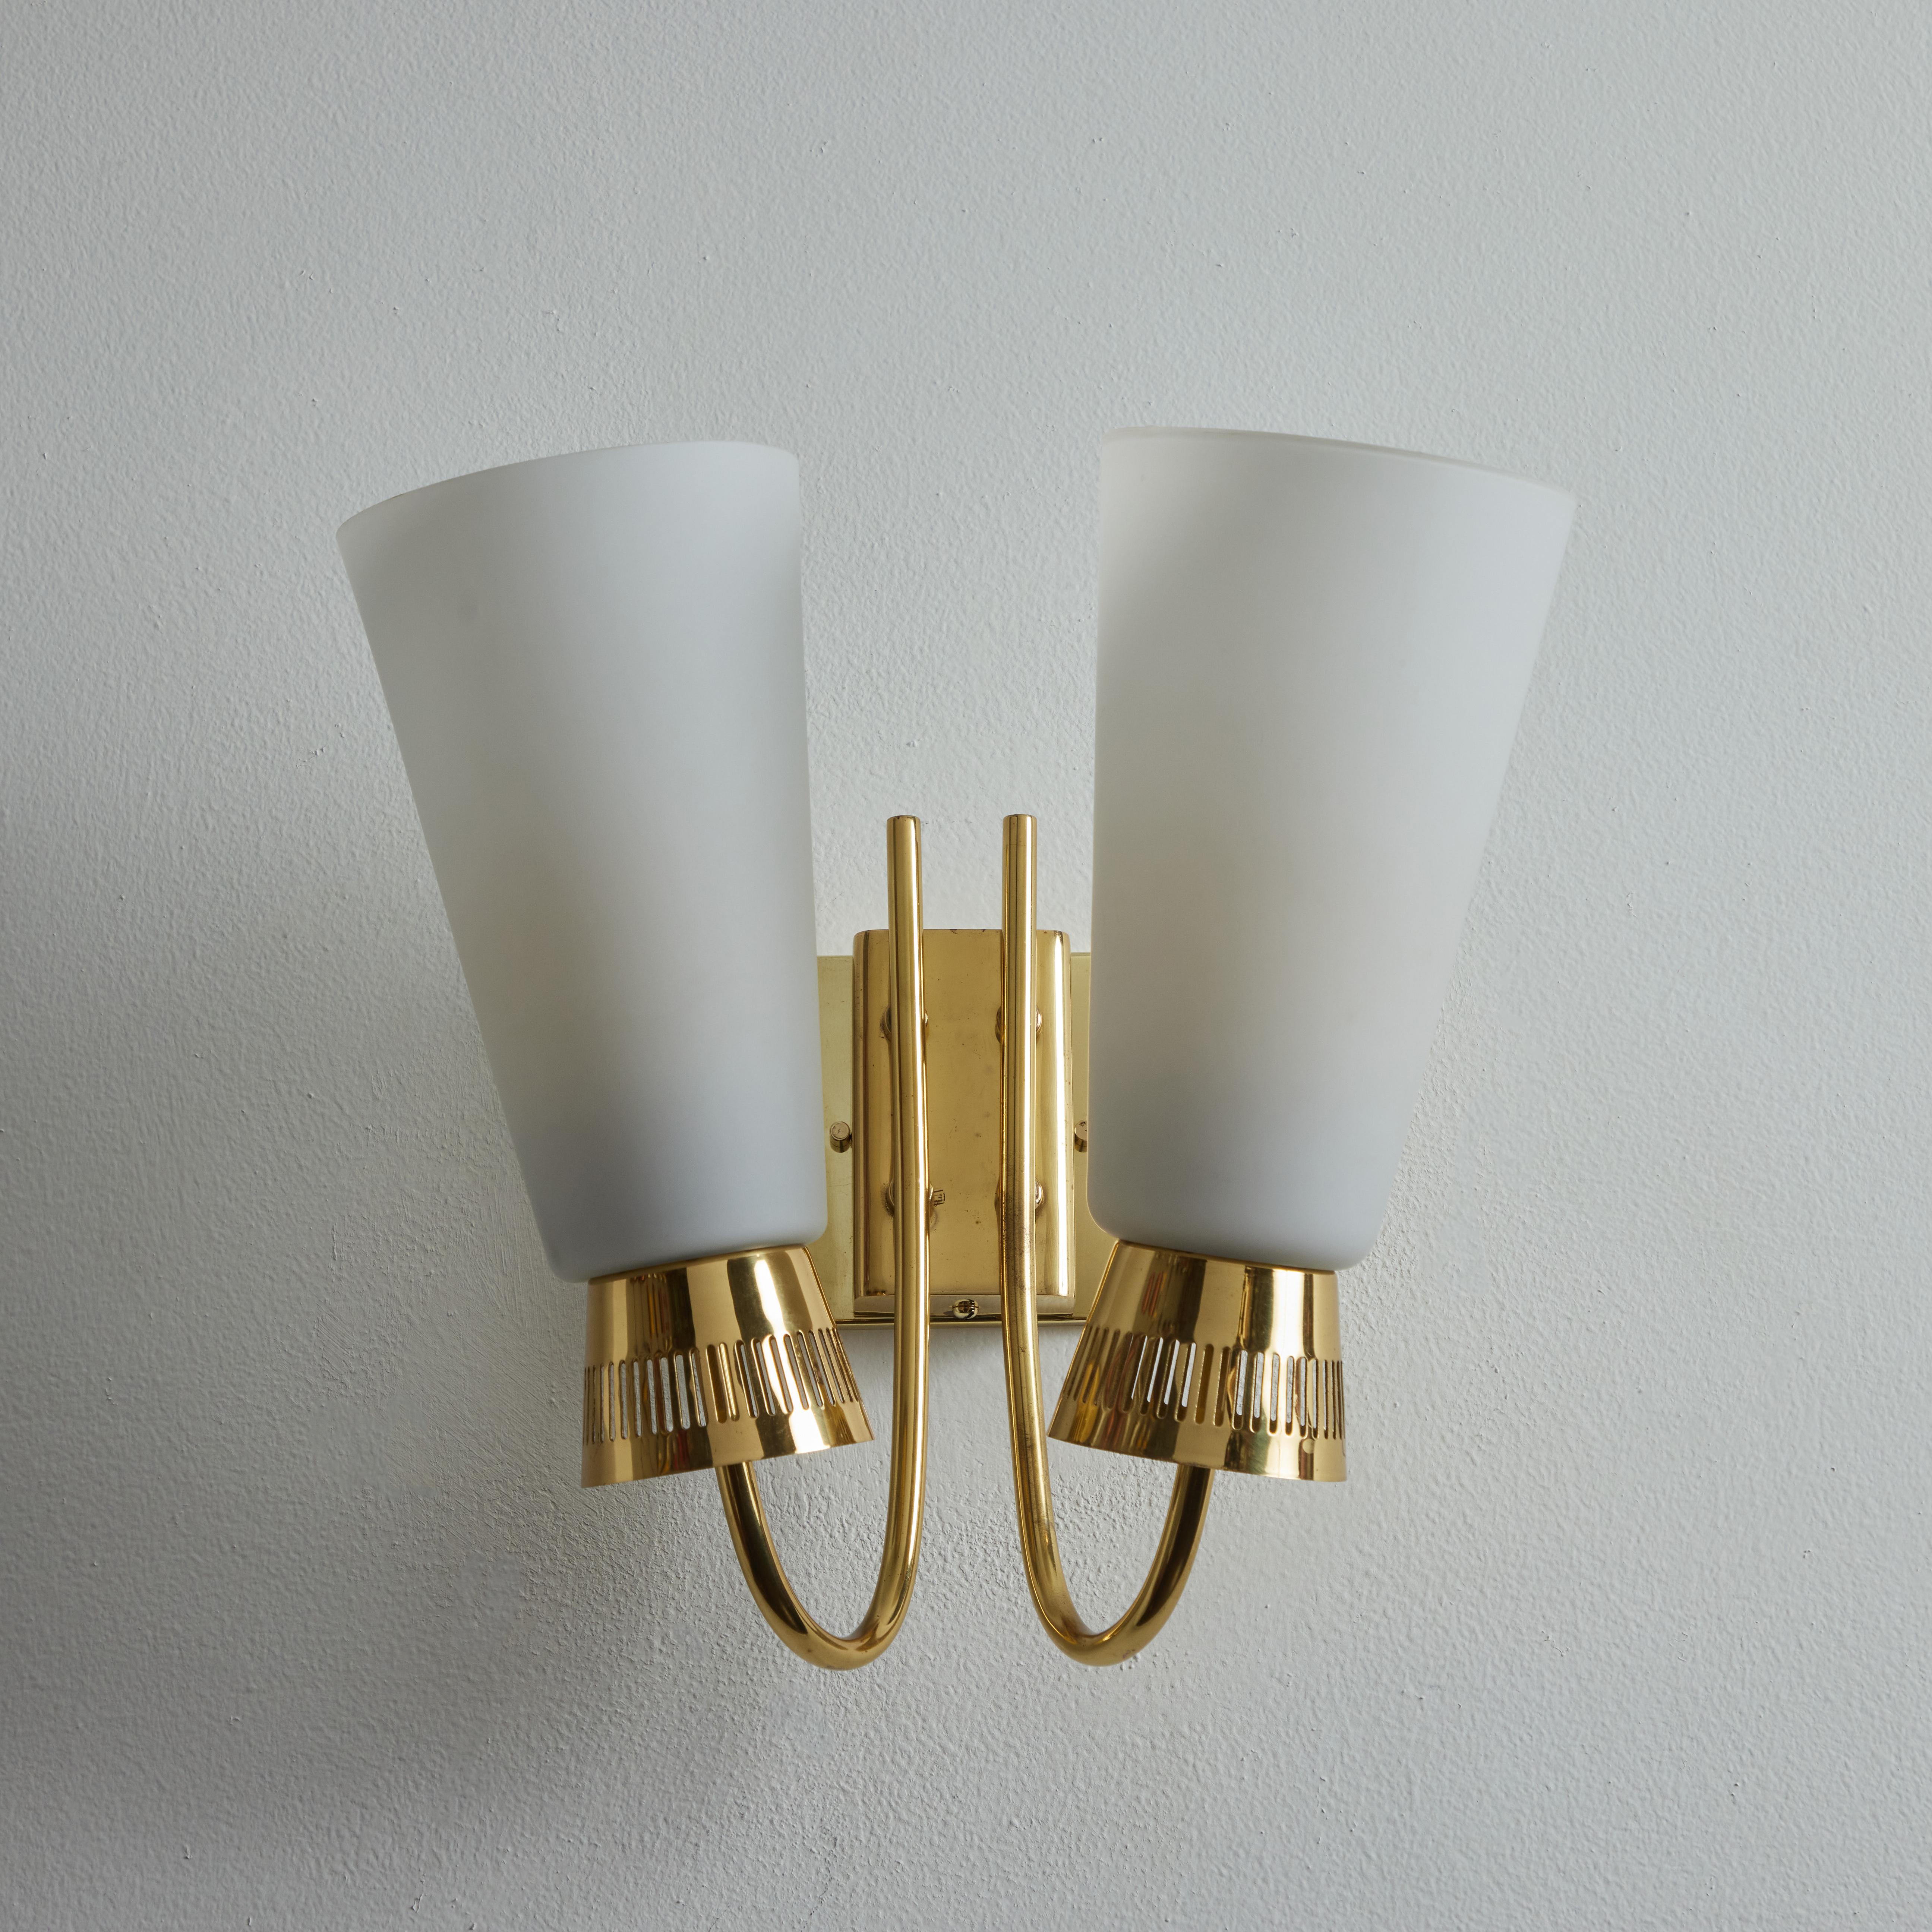 Pair of 1950s Mauri Almari Model #EY60 Brass & Glass Double Sconces for Itsu For Sale 1